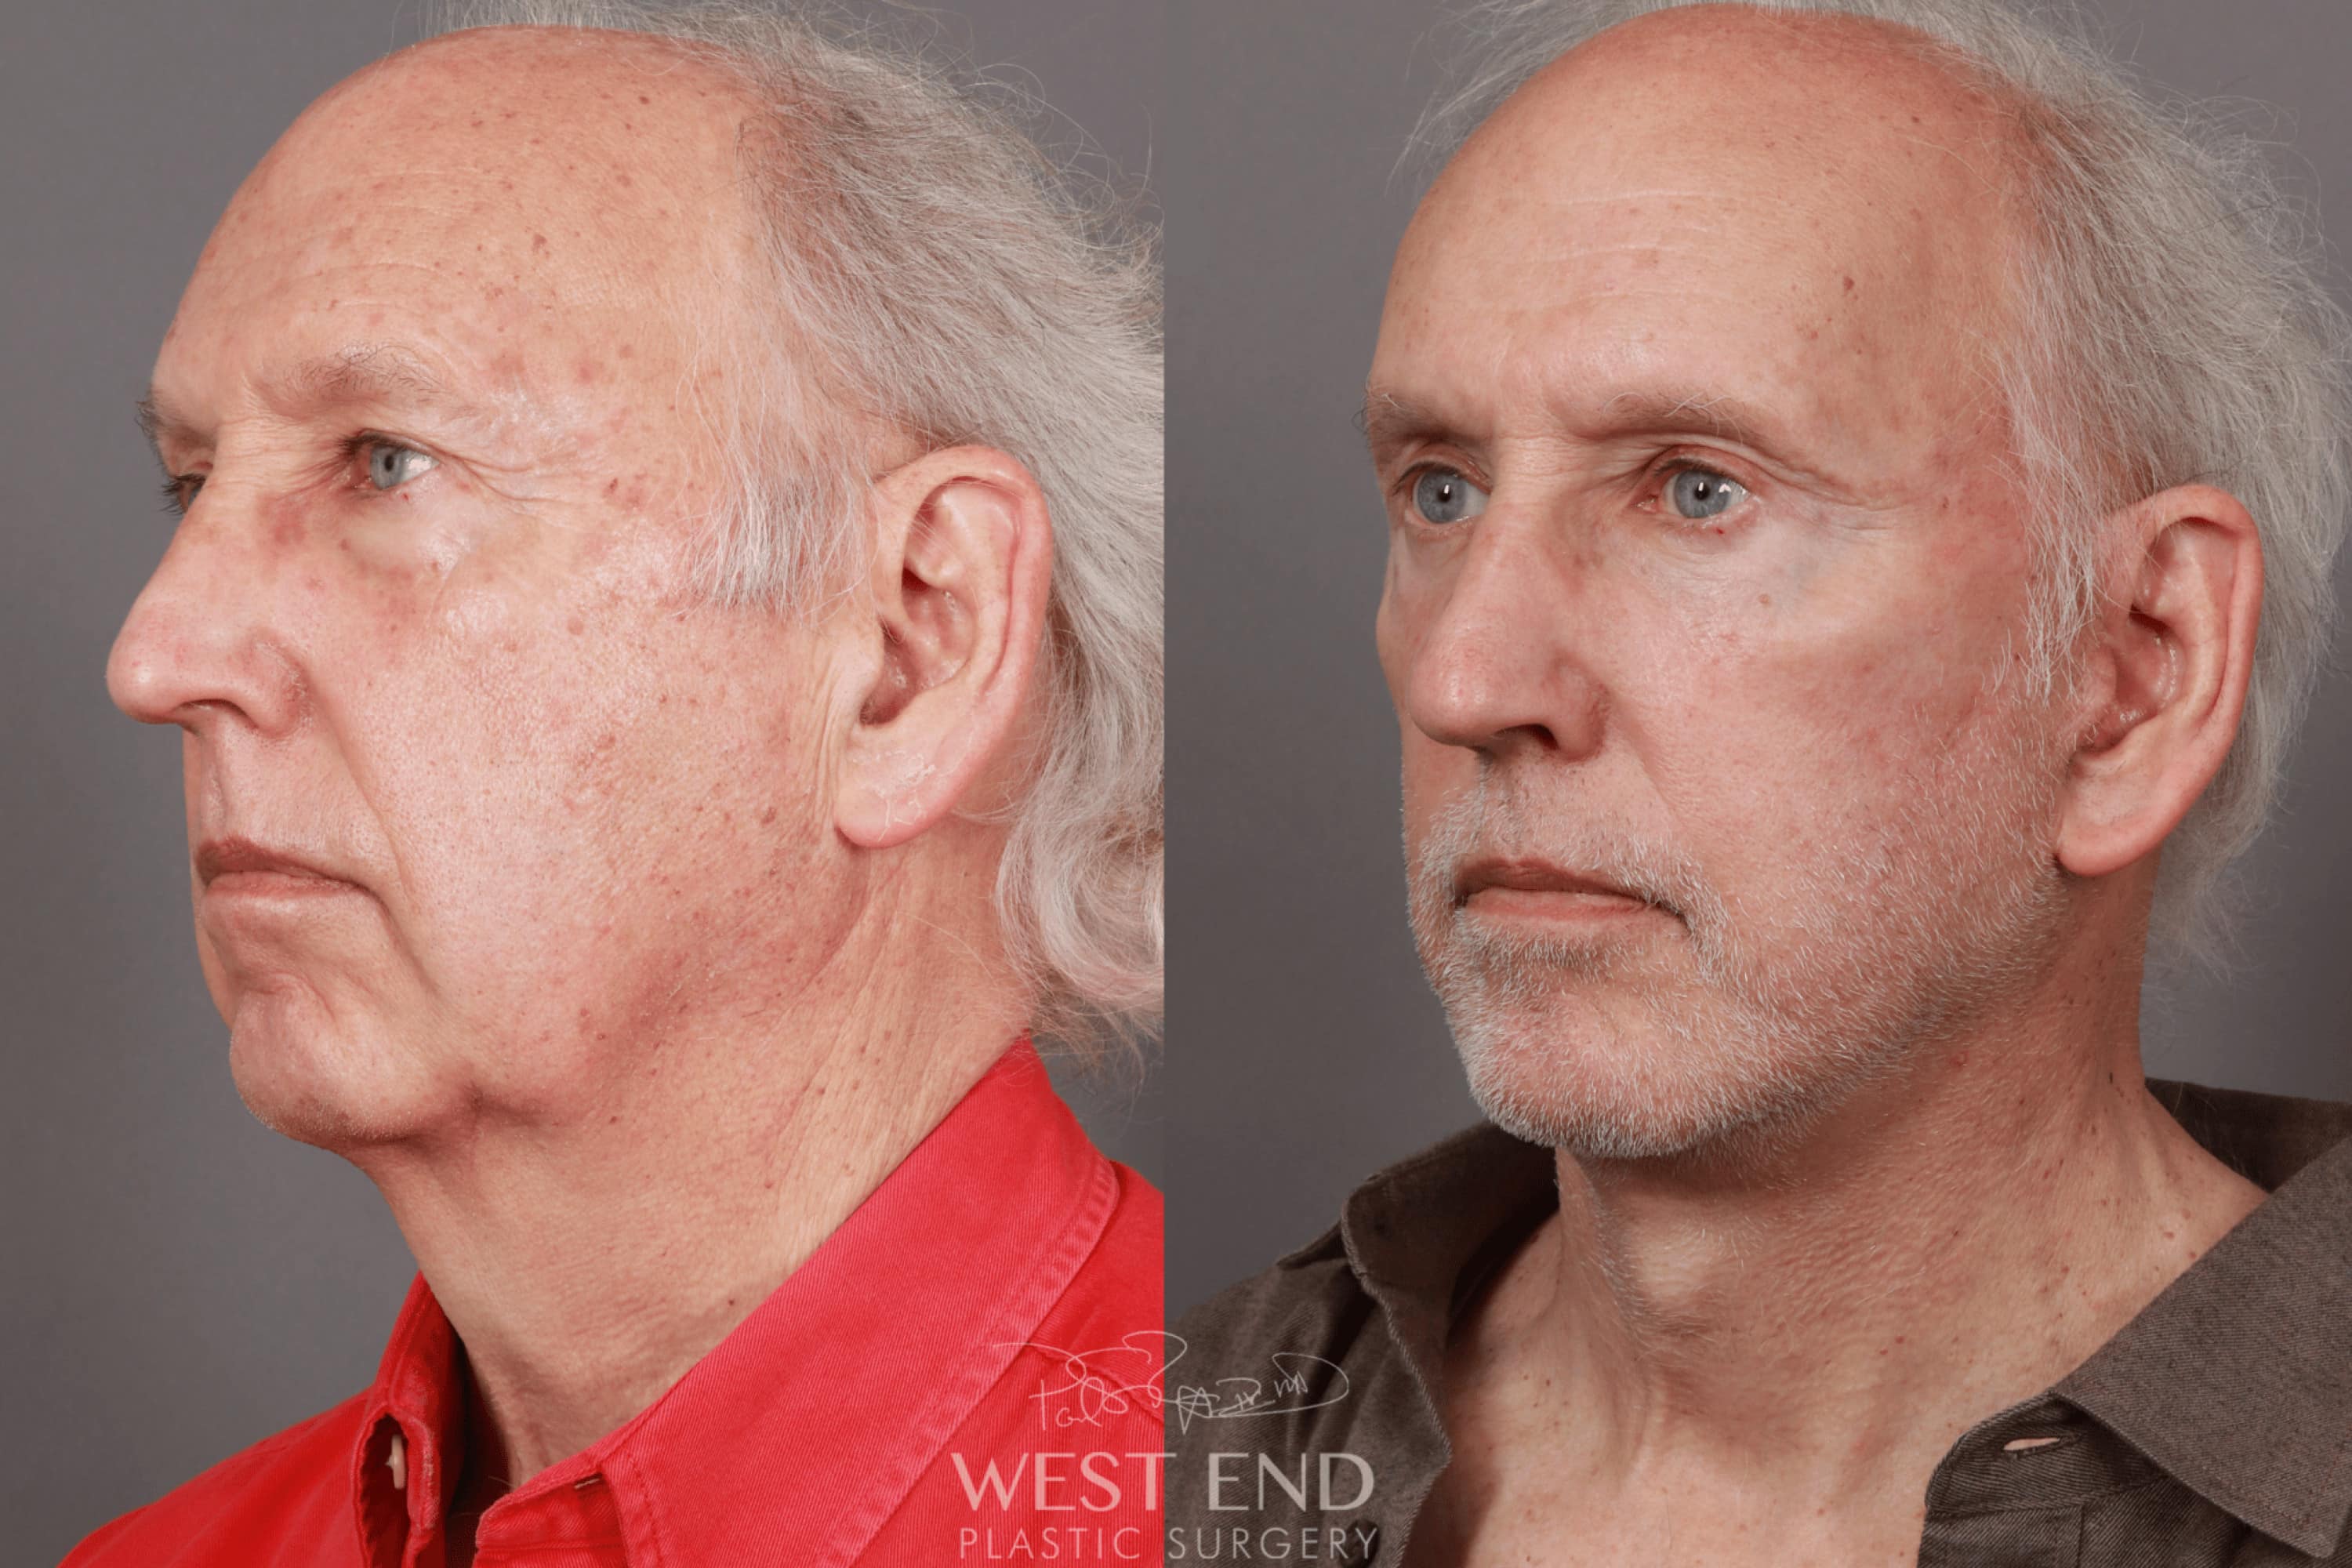 Deep Plane Facelift & Neck Lift, Eyelid Lift, Fat Grafting, and CO2 Resurfacing (5 Months Post-Op)